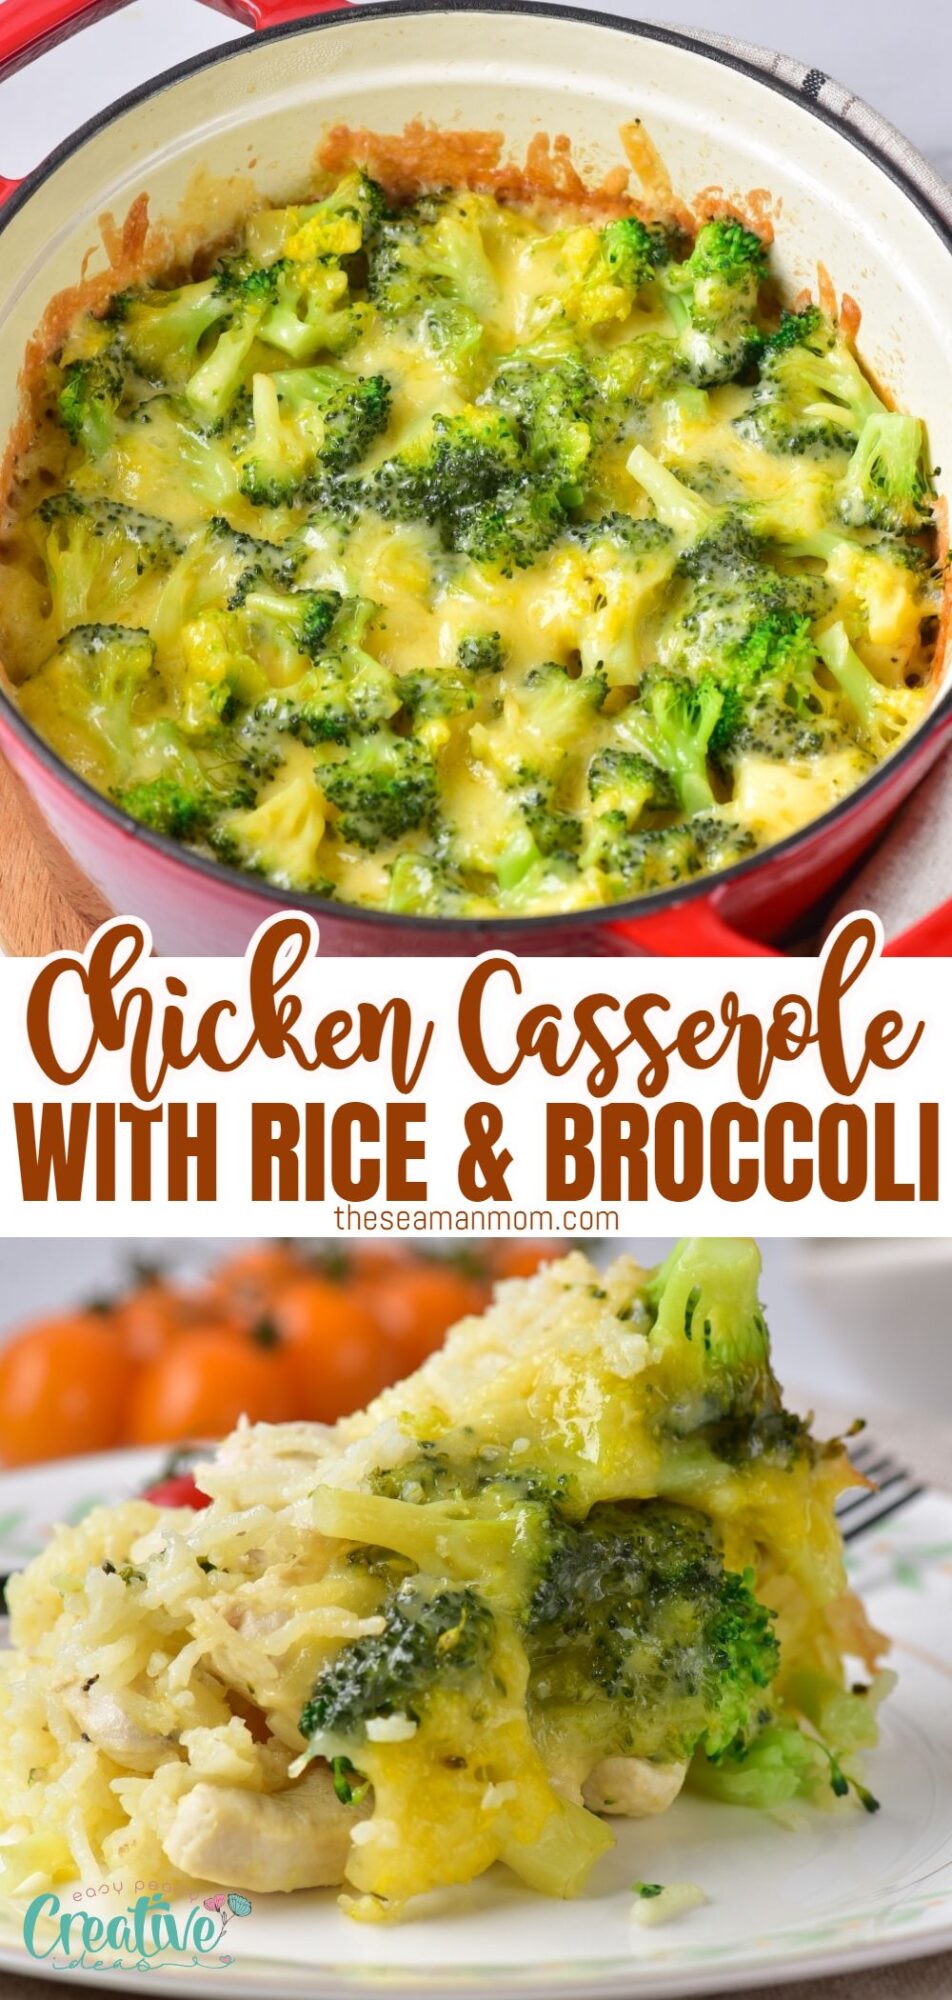 A delicious chicken rice broccoli casserole, a perfect blend of flavors and textures.